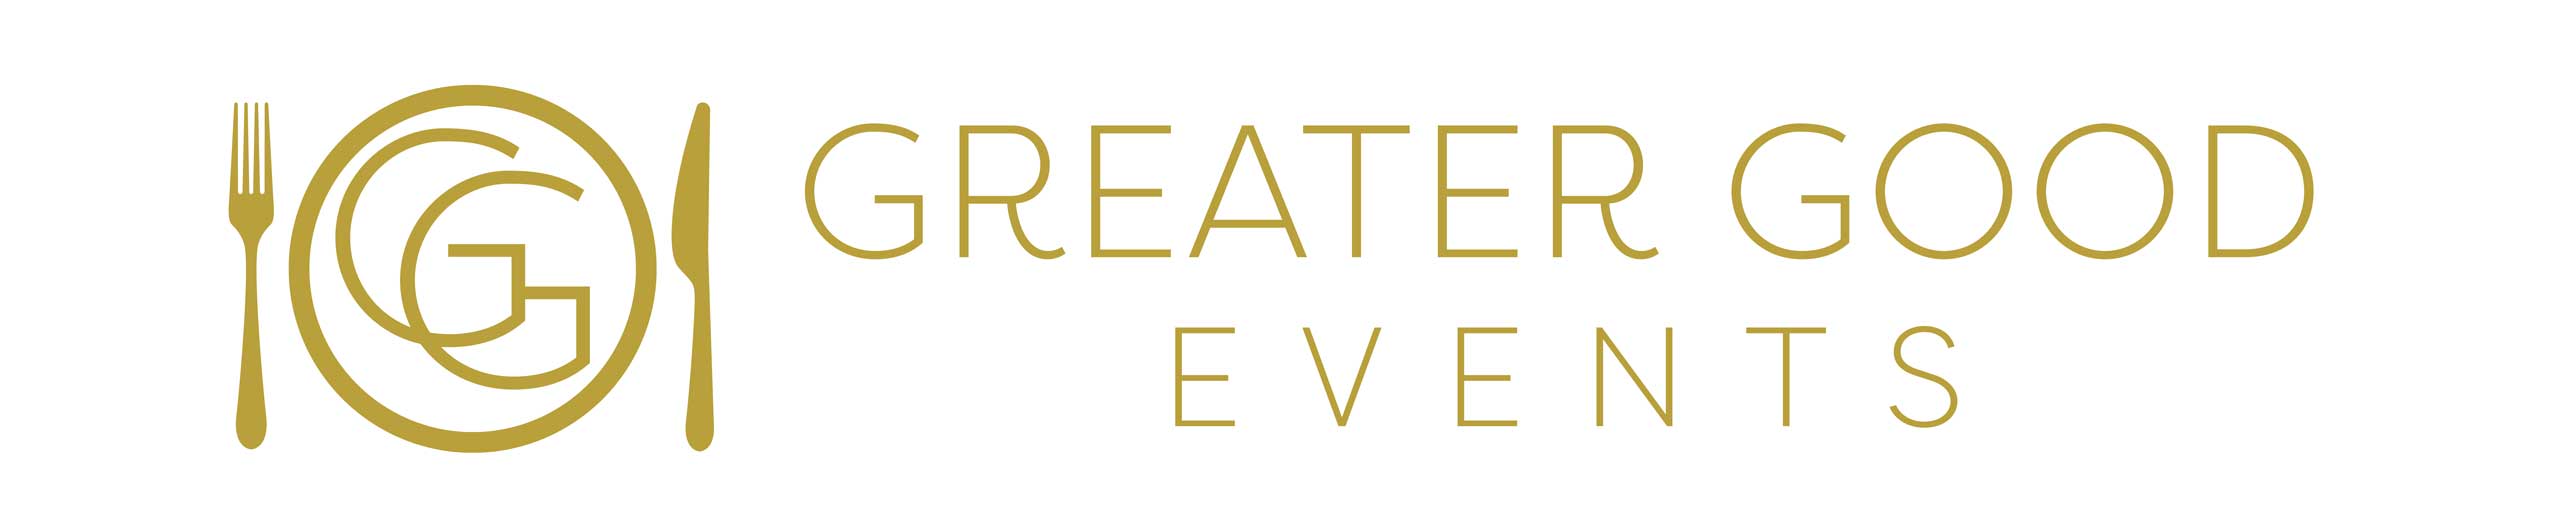 Greater Good Events long logo.